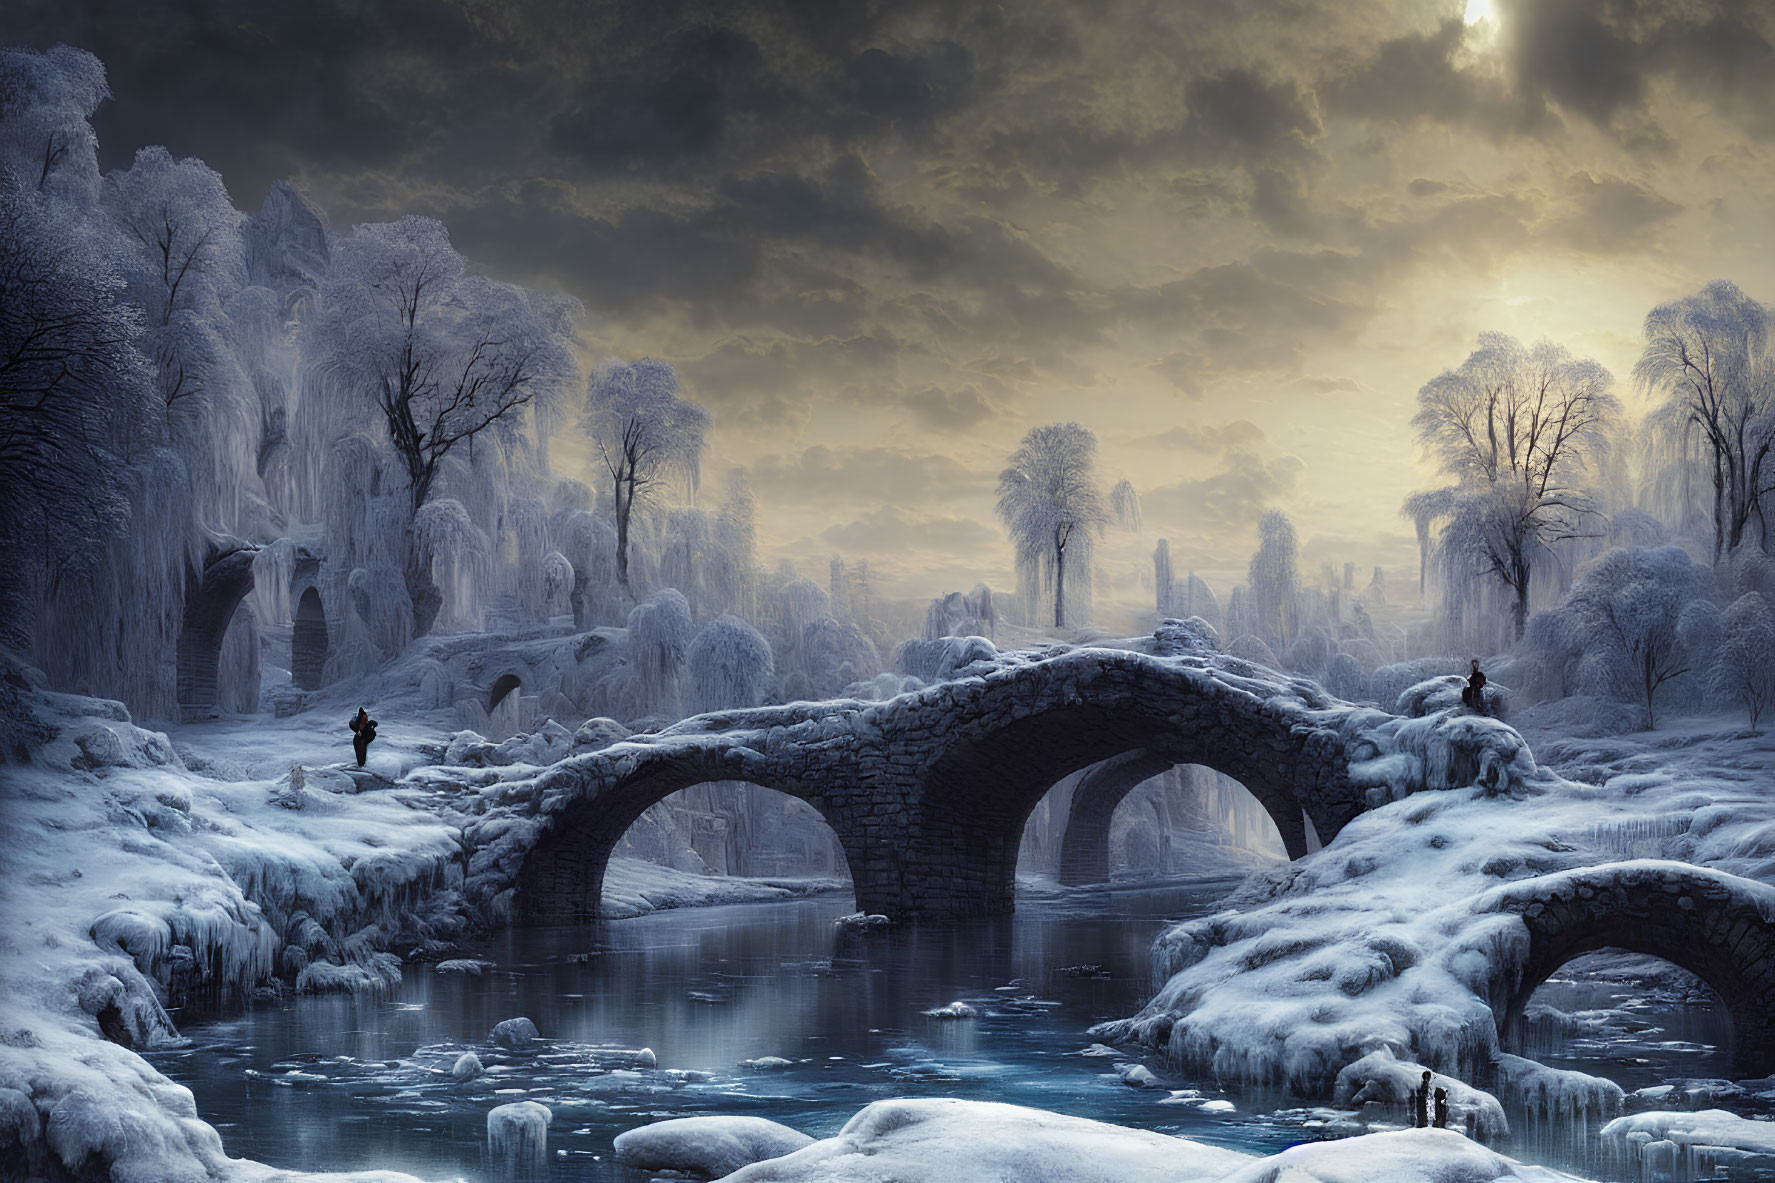 Snow-covered trees and stone bridge in serene winter landscape